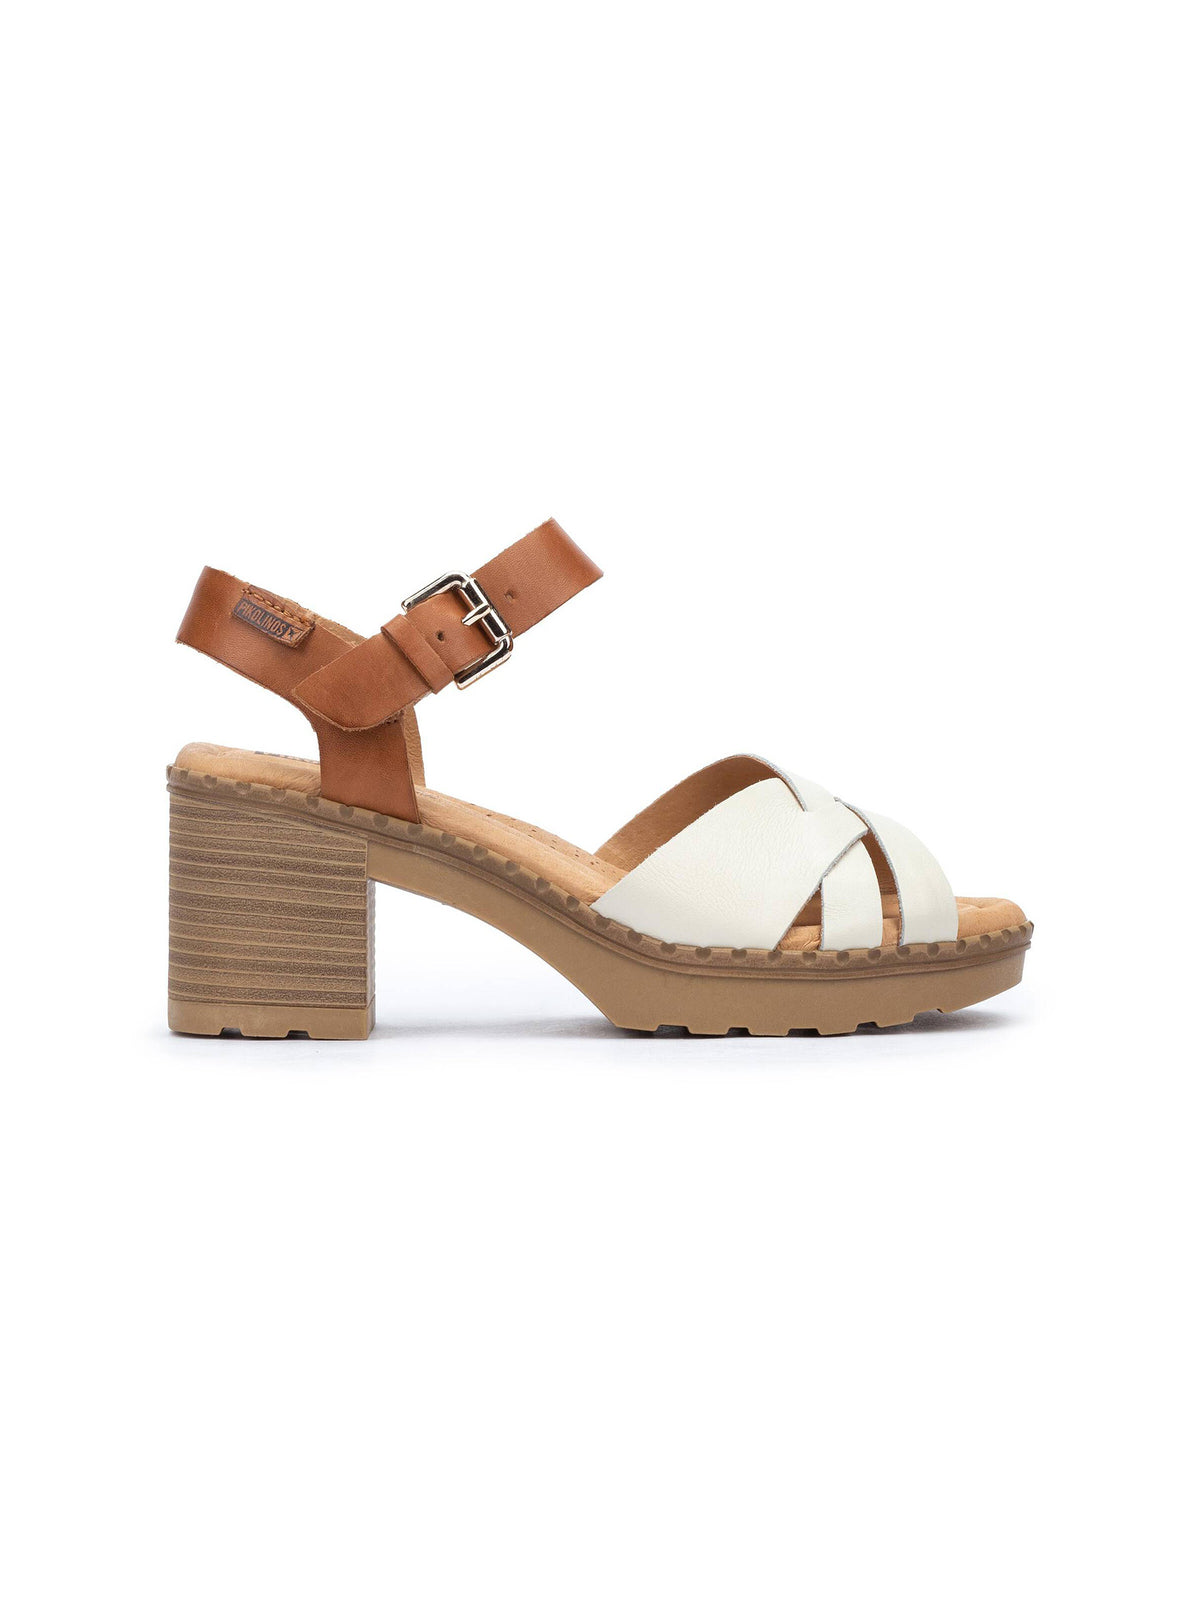 pikolinos canarias braided heel sandals in nata-single side view